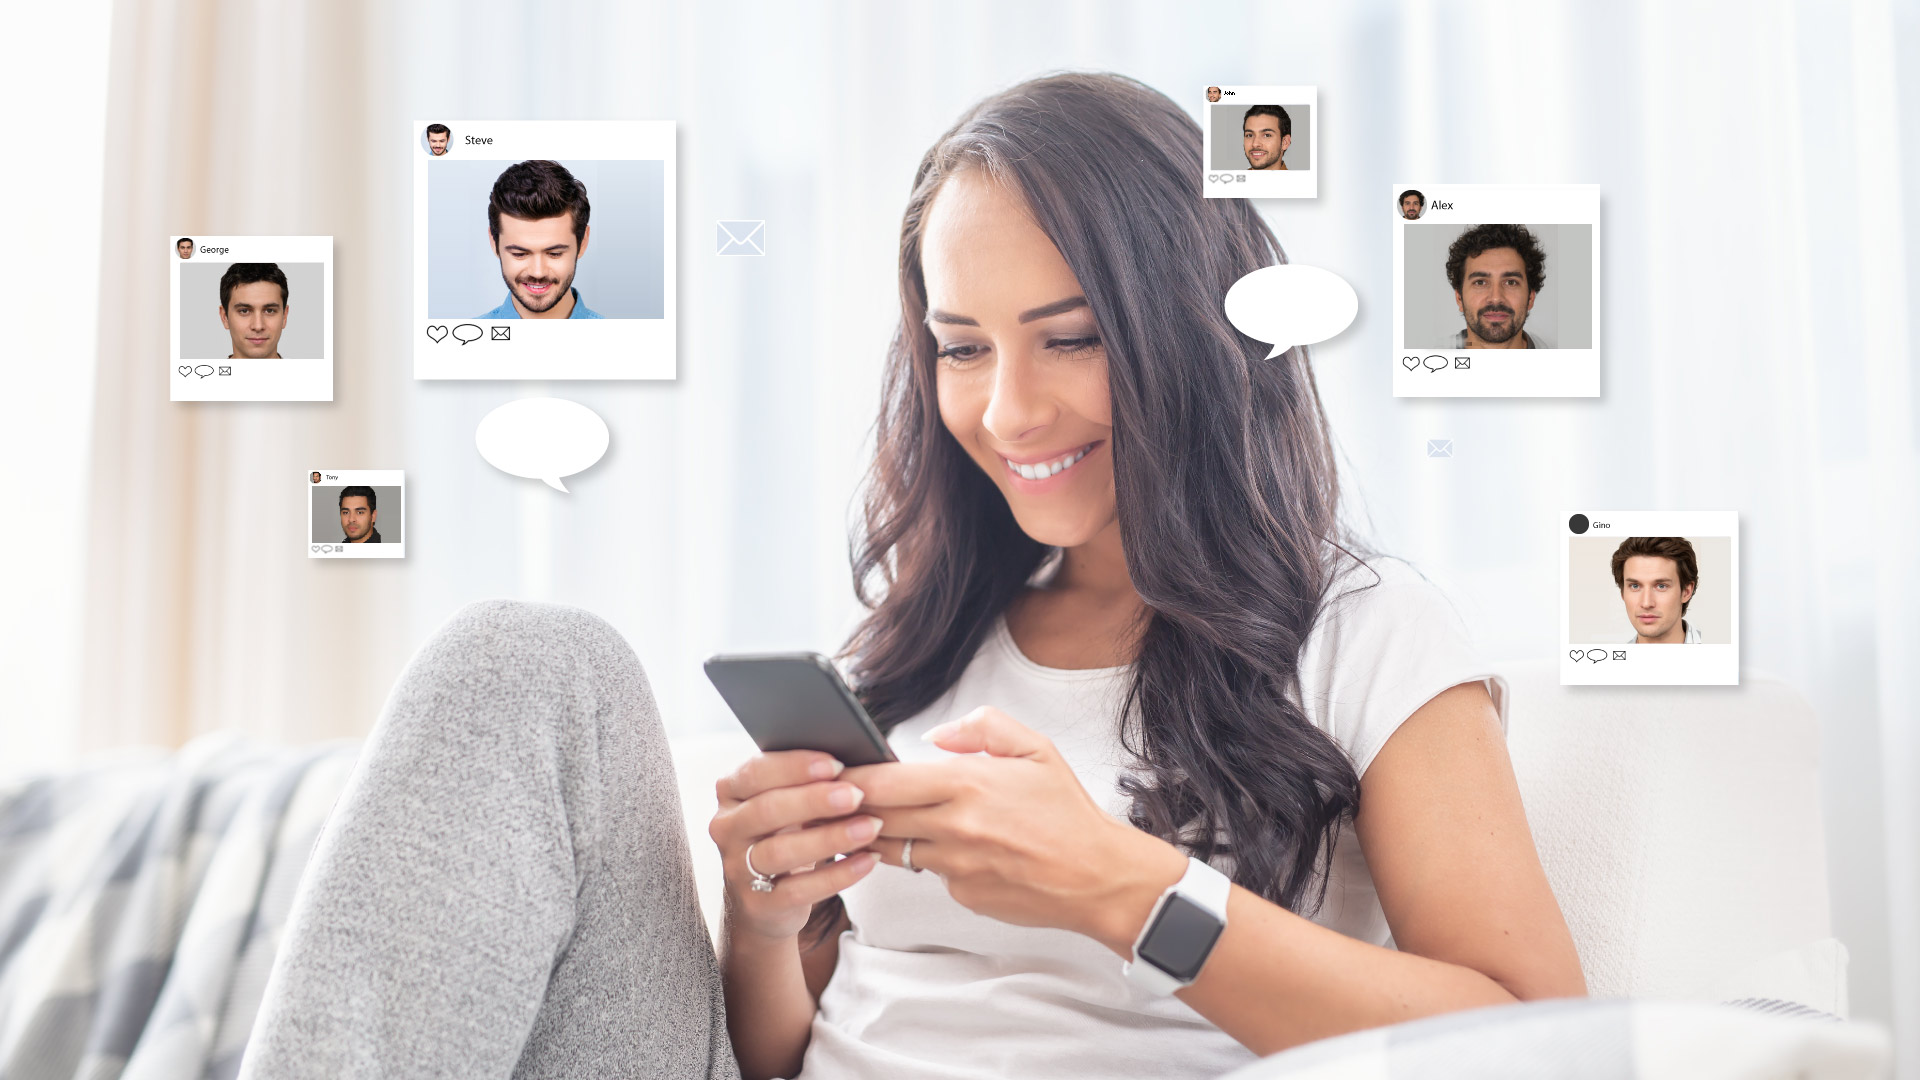 Brunette woman holding her phone while smiling while squares of different male dating profiles float around her.